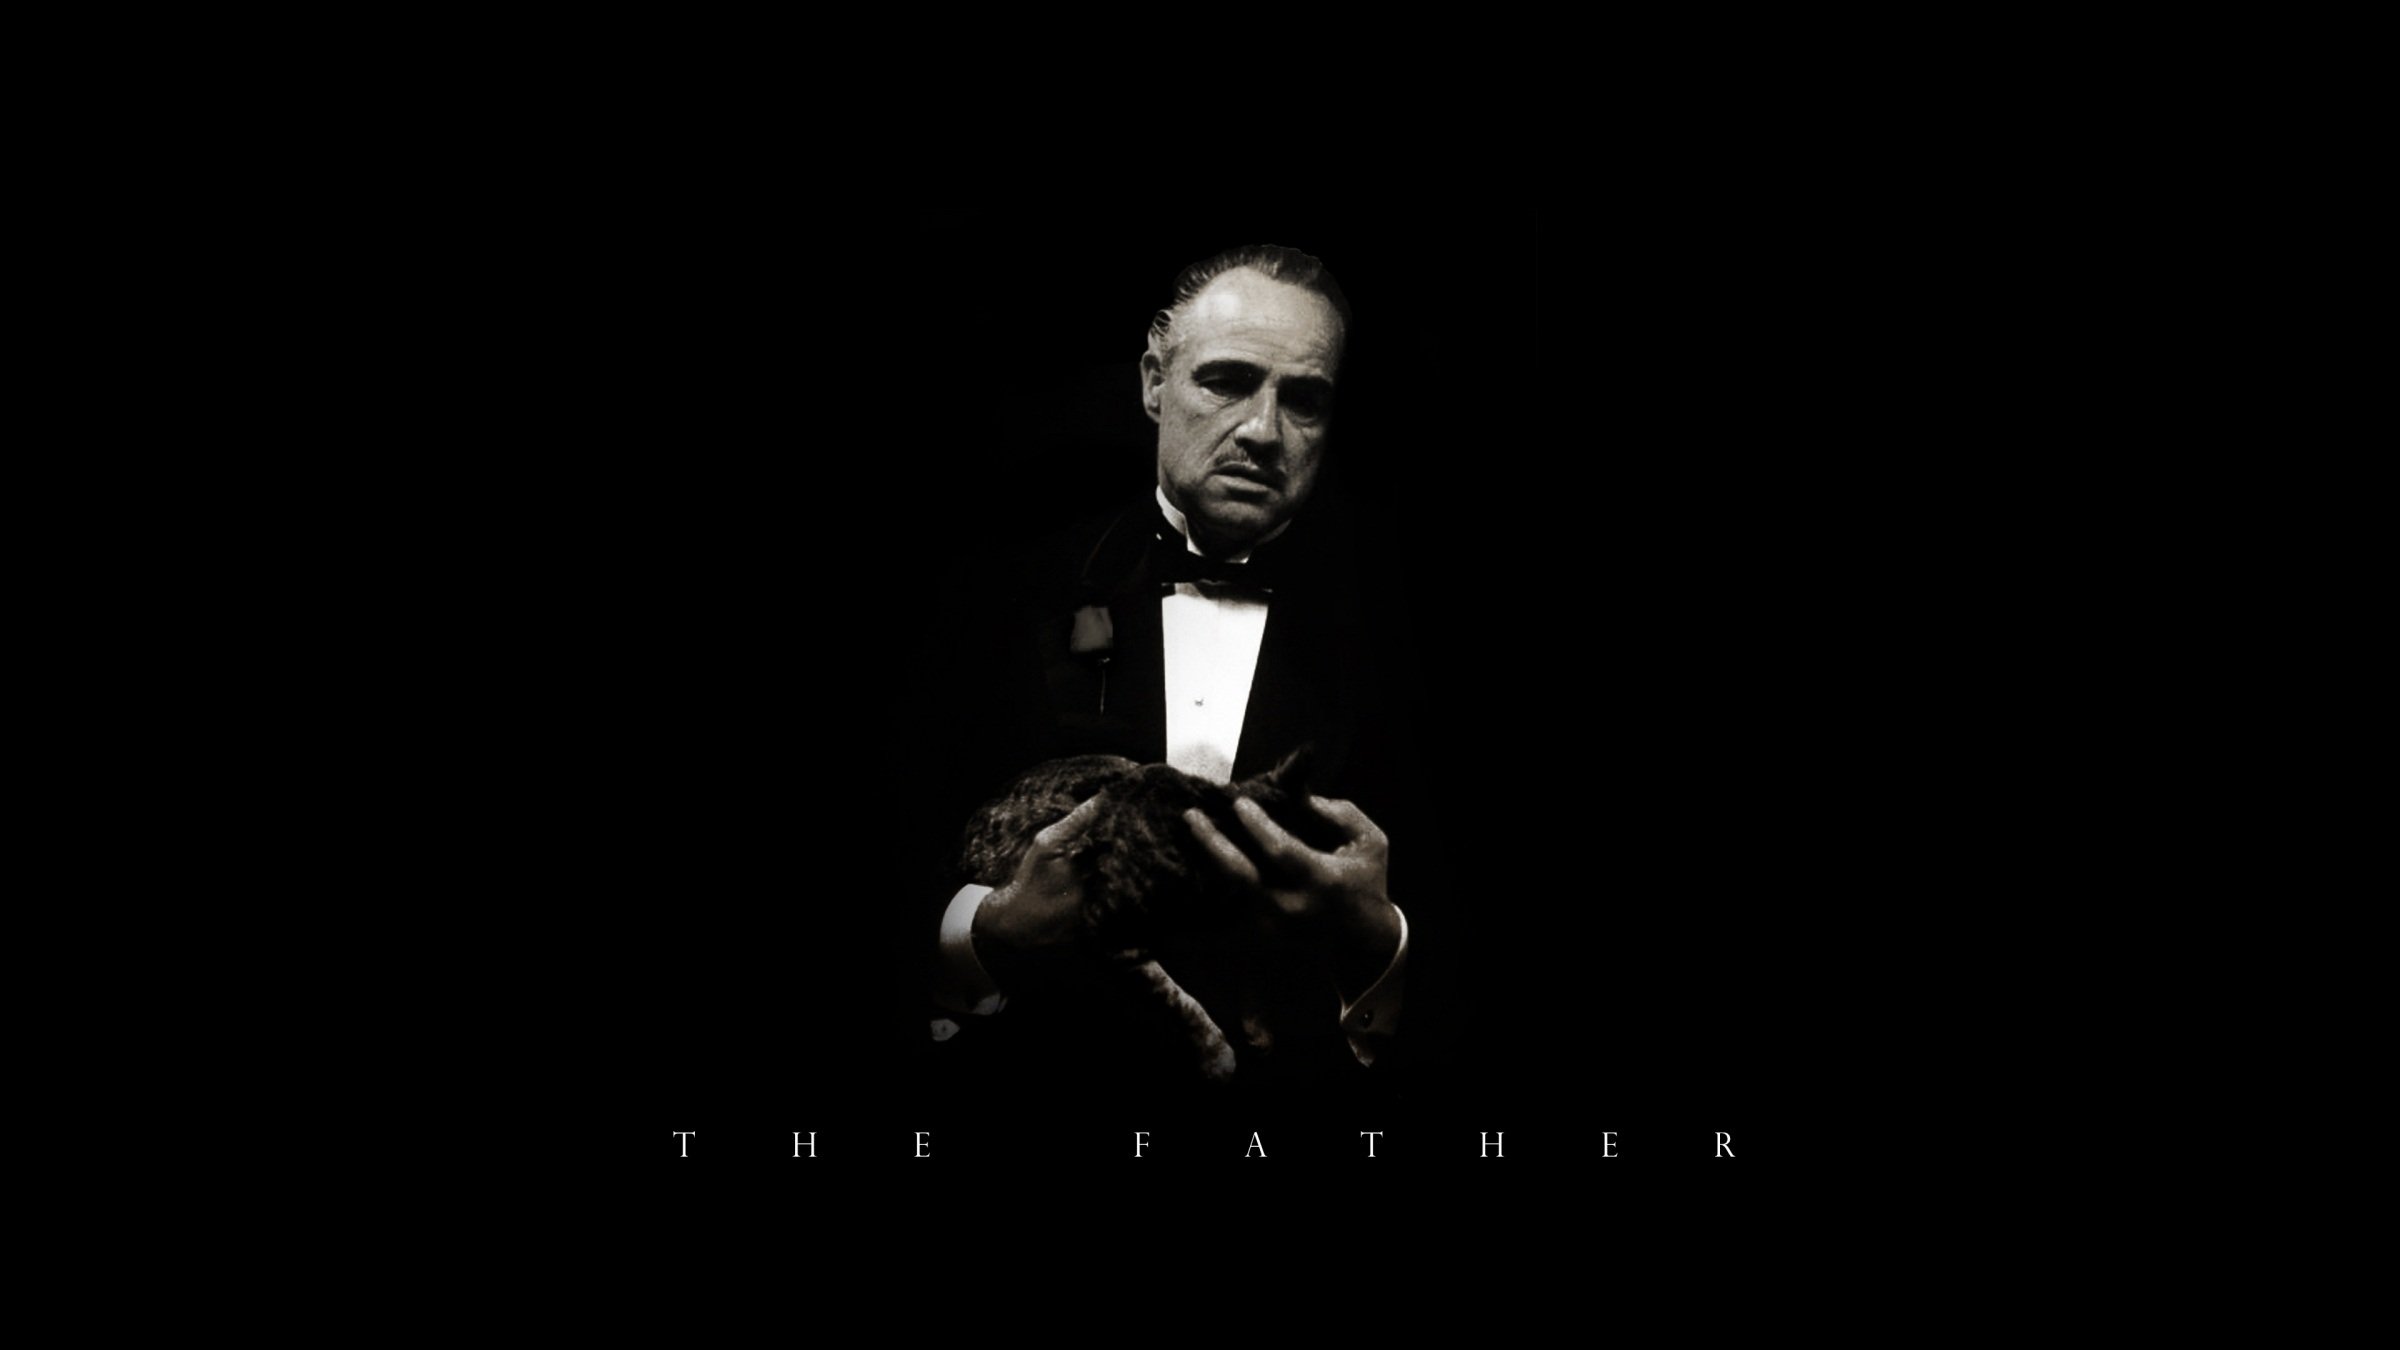 the, Godfather Wallpaper